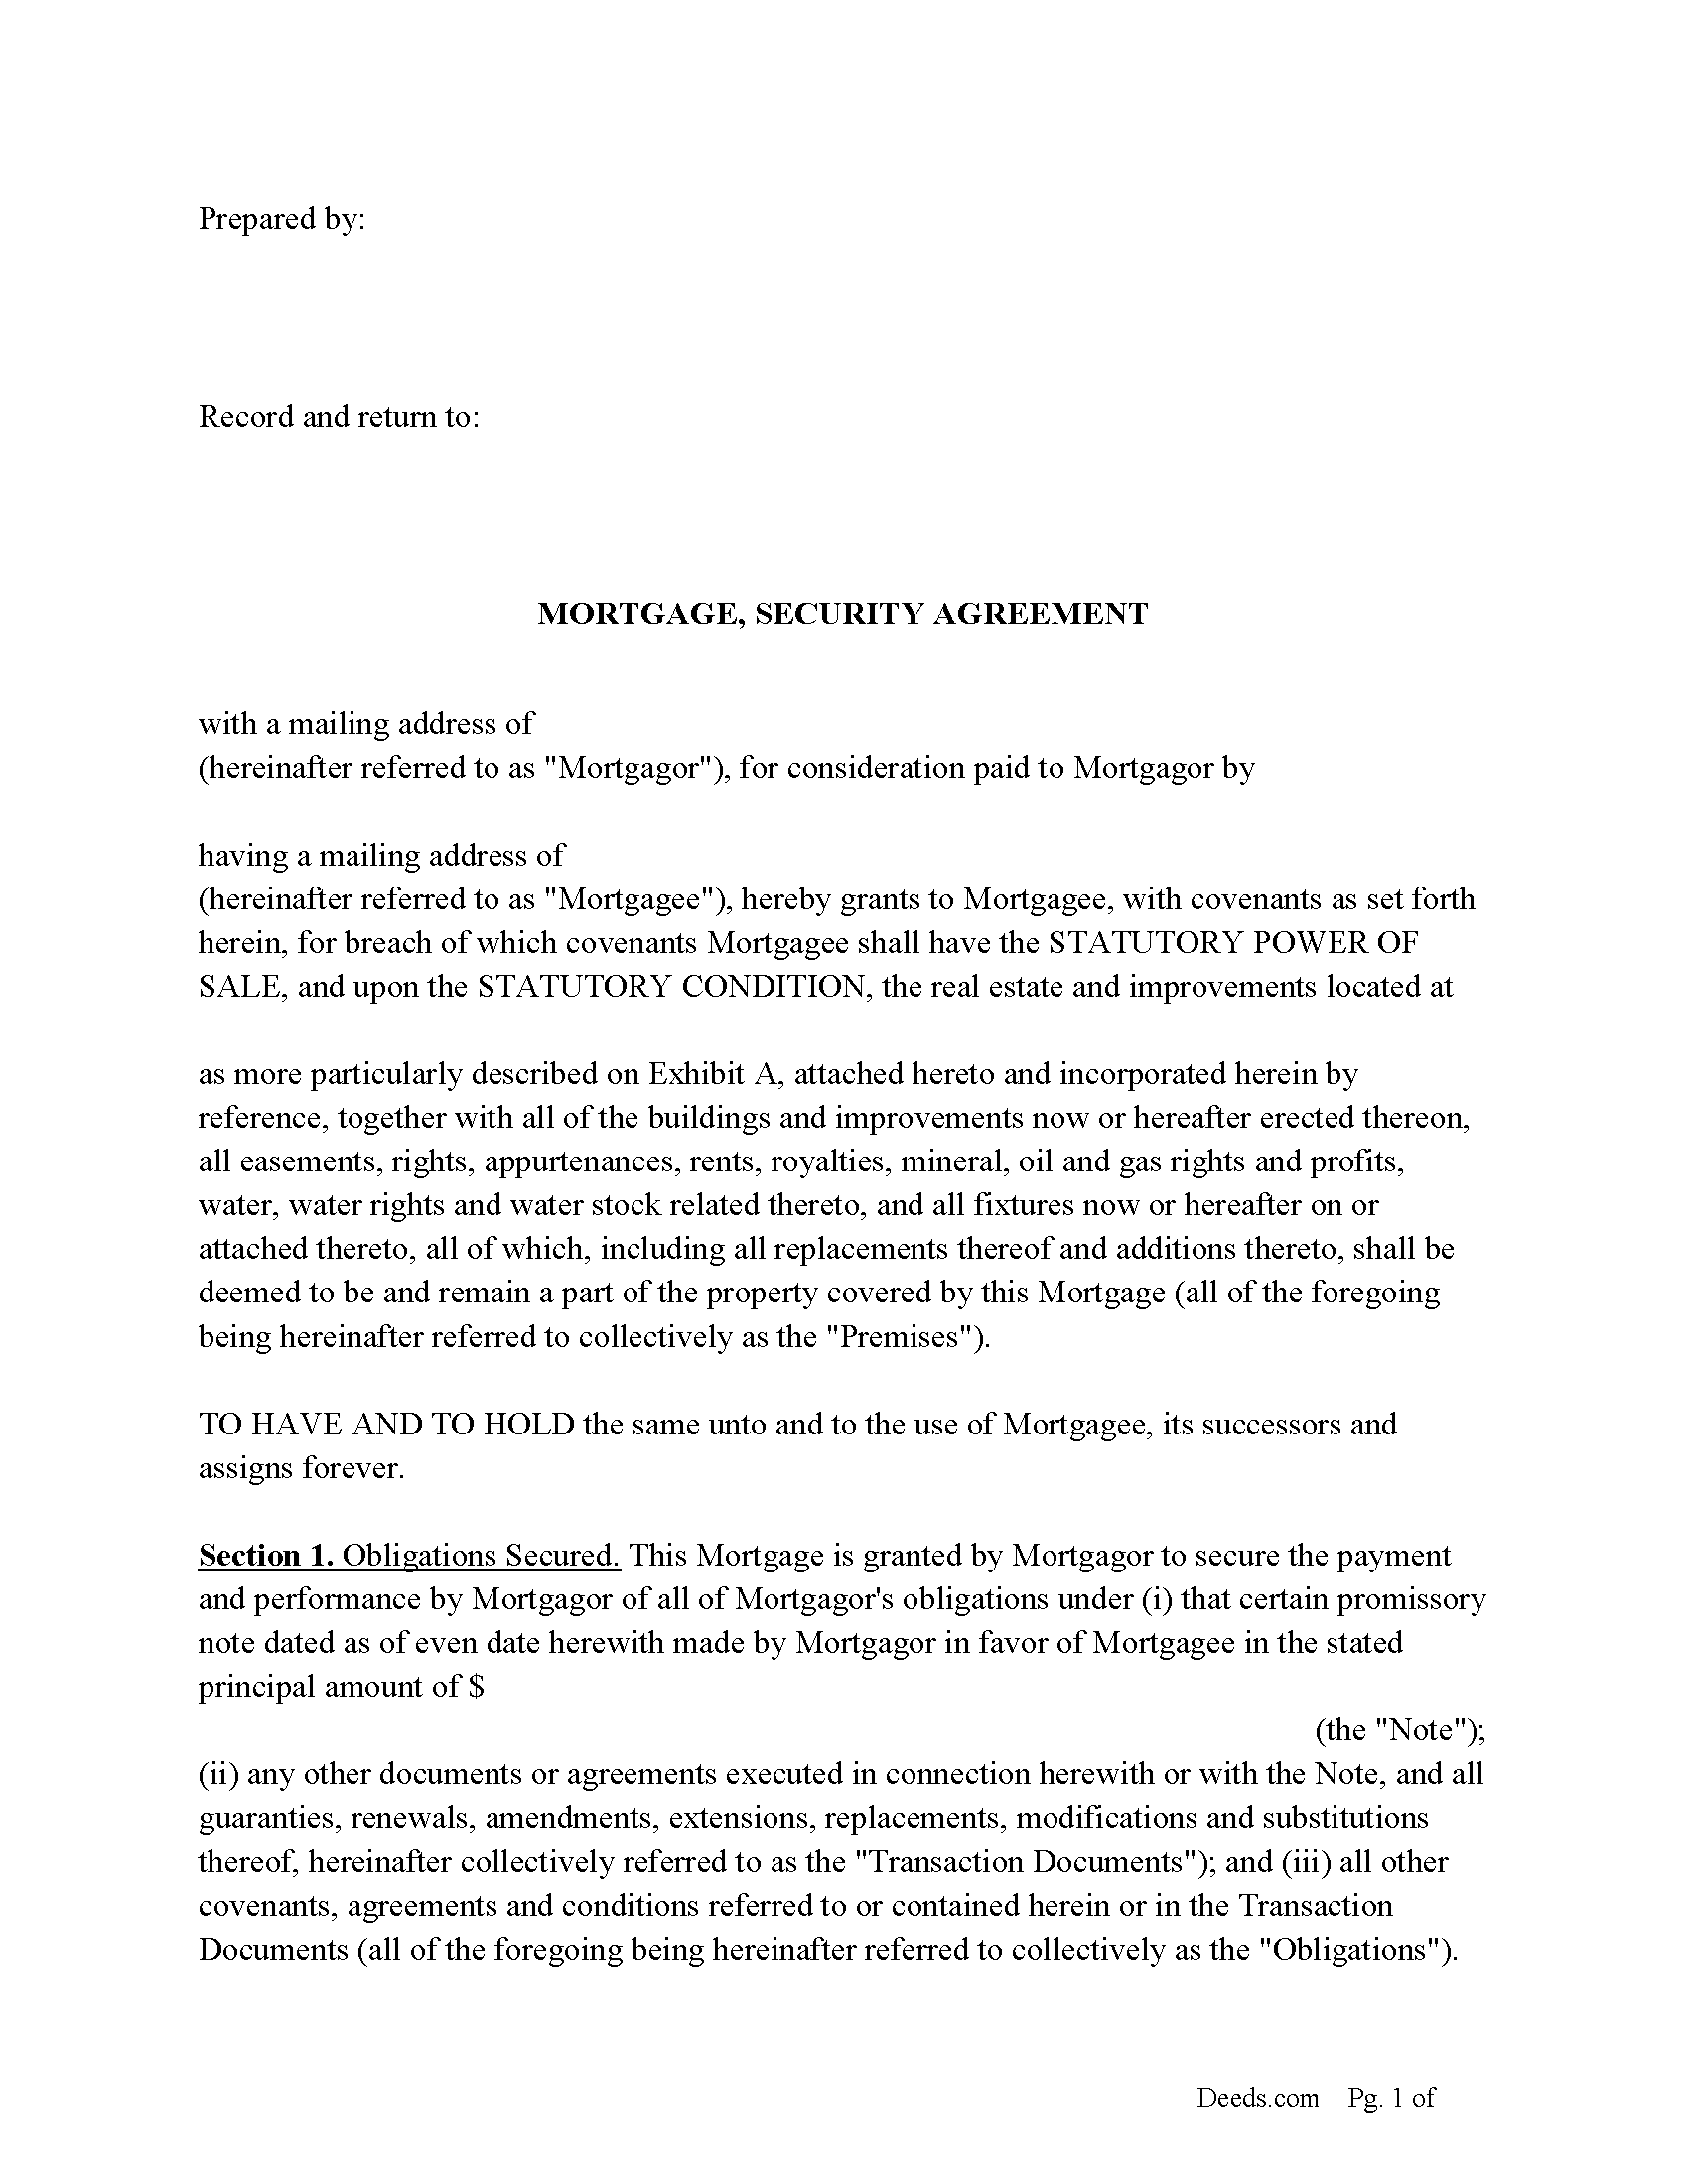 Mortgage Security Agreement and Promissory Note